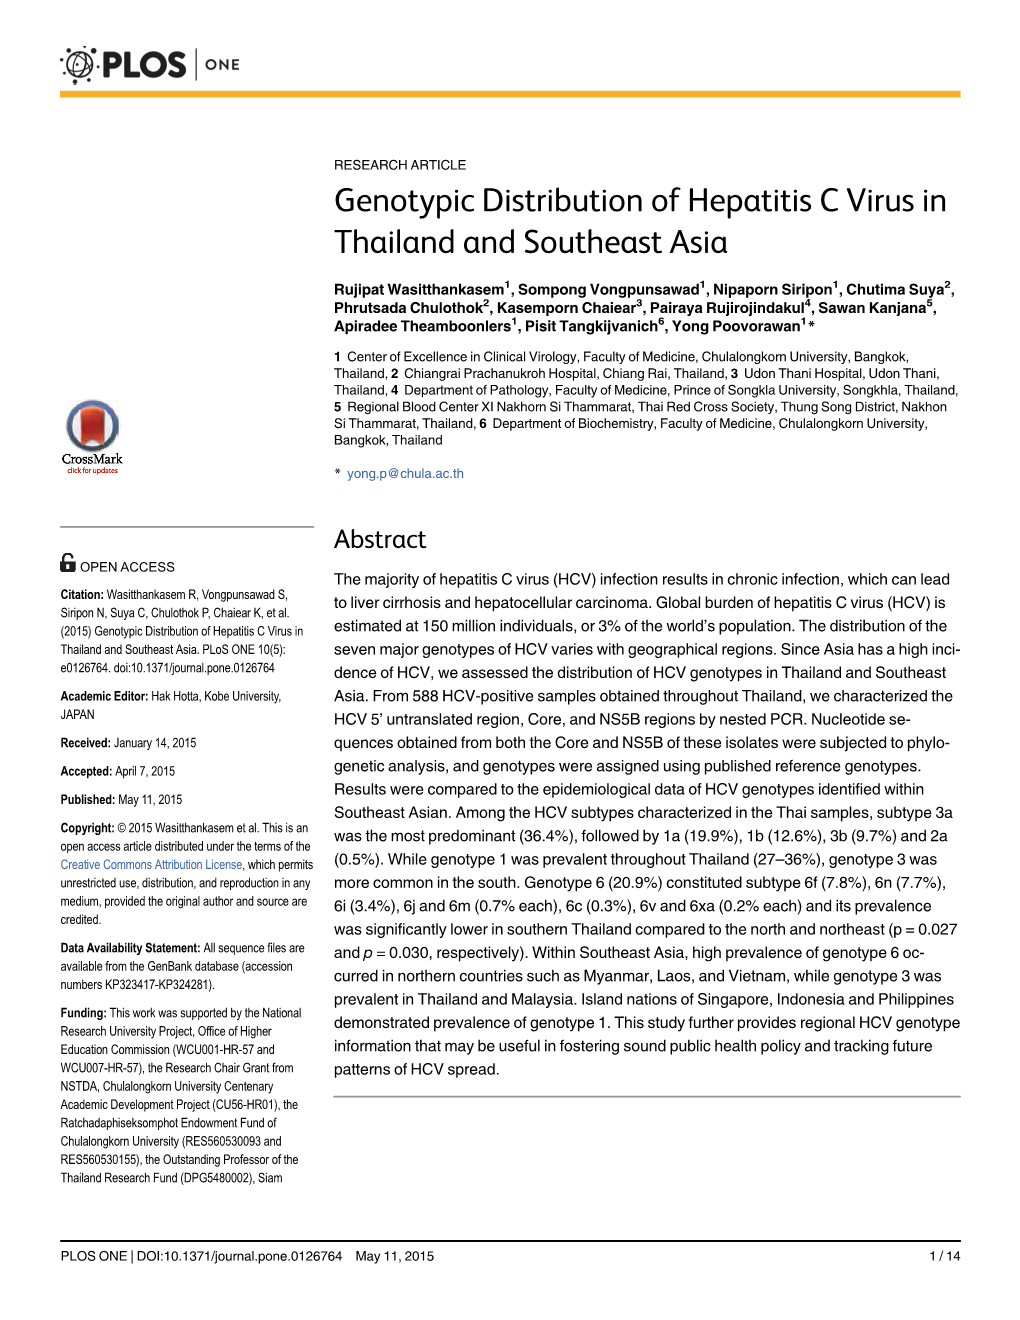 Genotypic Distribution of Hepatitis C Virus in Thailand and Southeast Asia